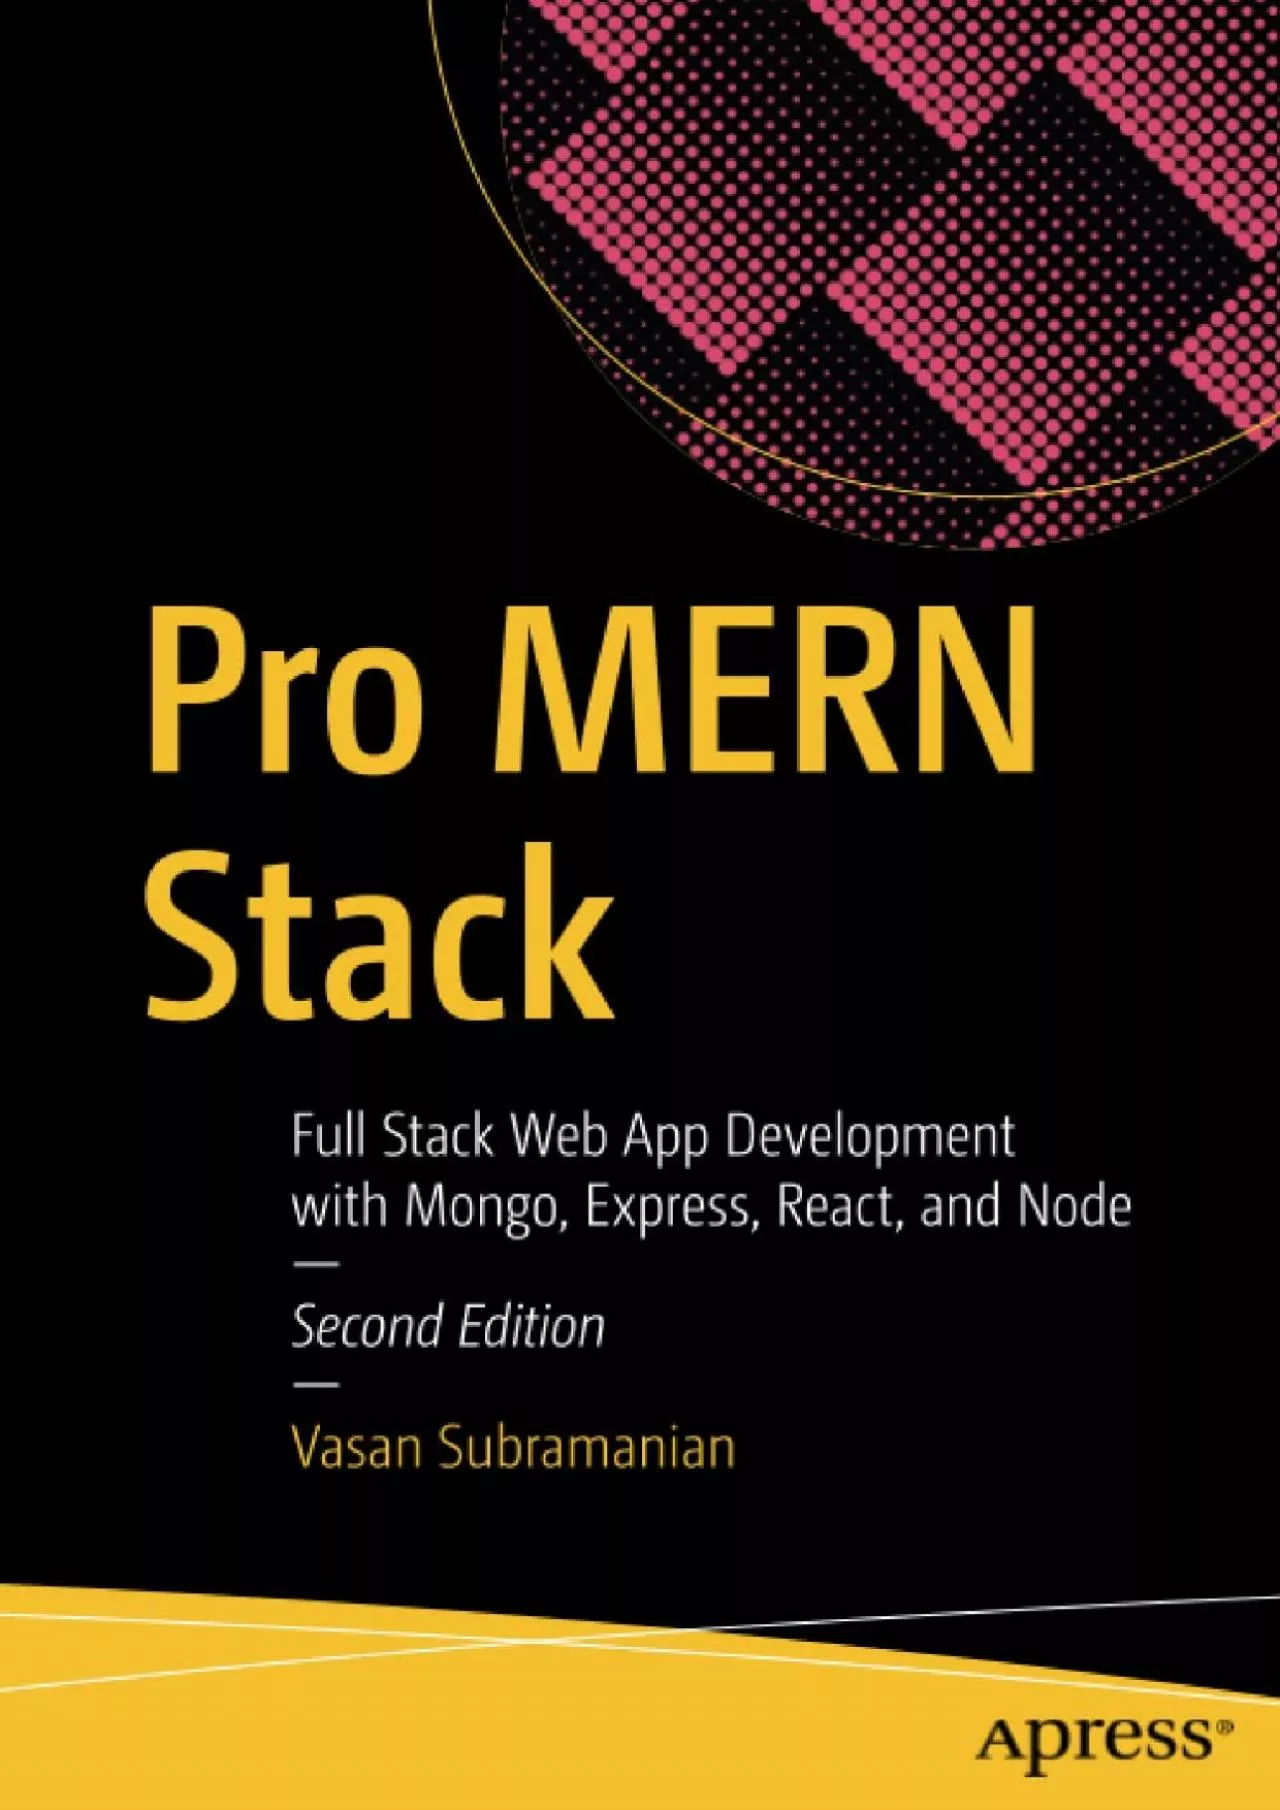 [READ]-Pro MERN Stack: Full Stack Web App Development with Mongo, Express, React, and